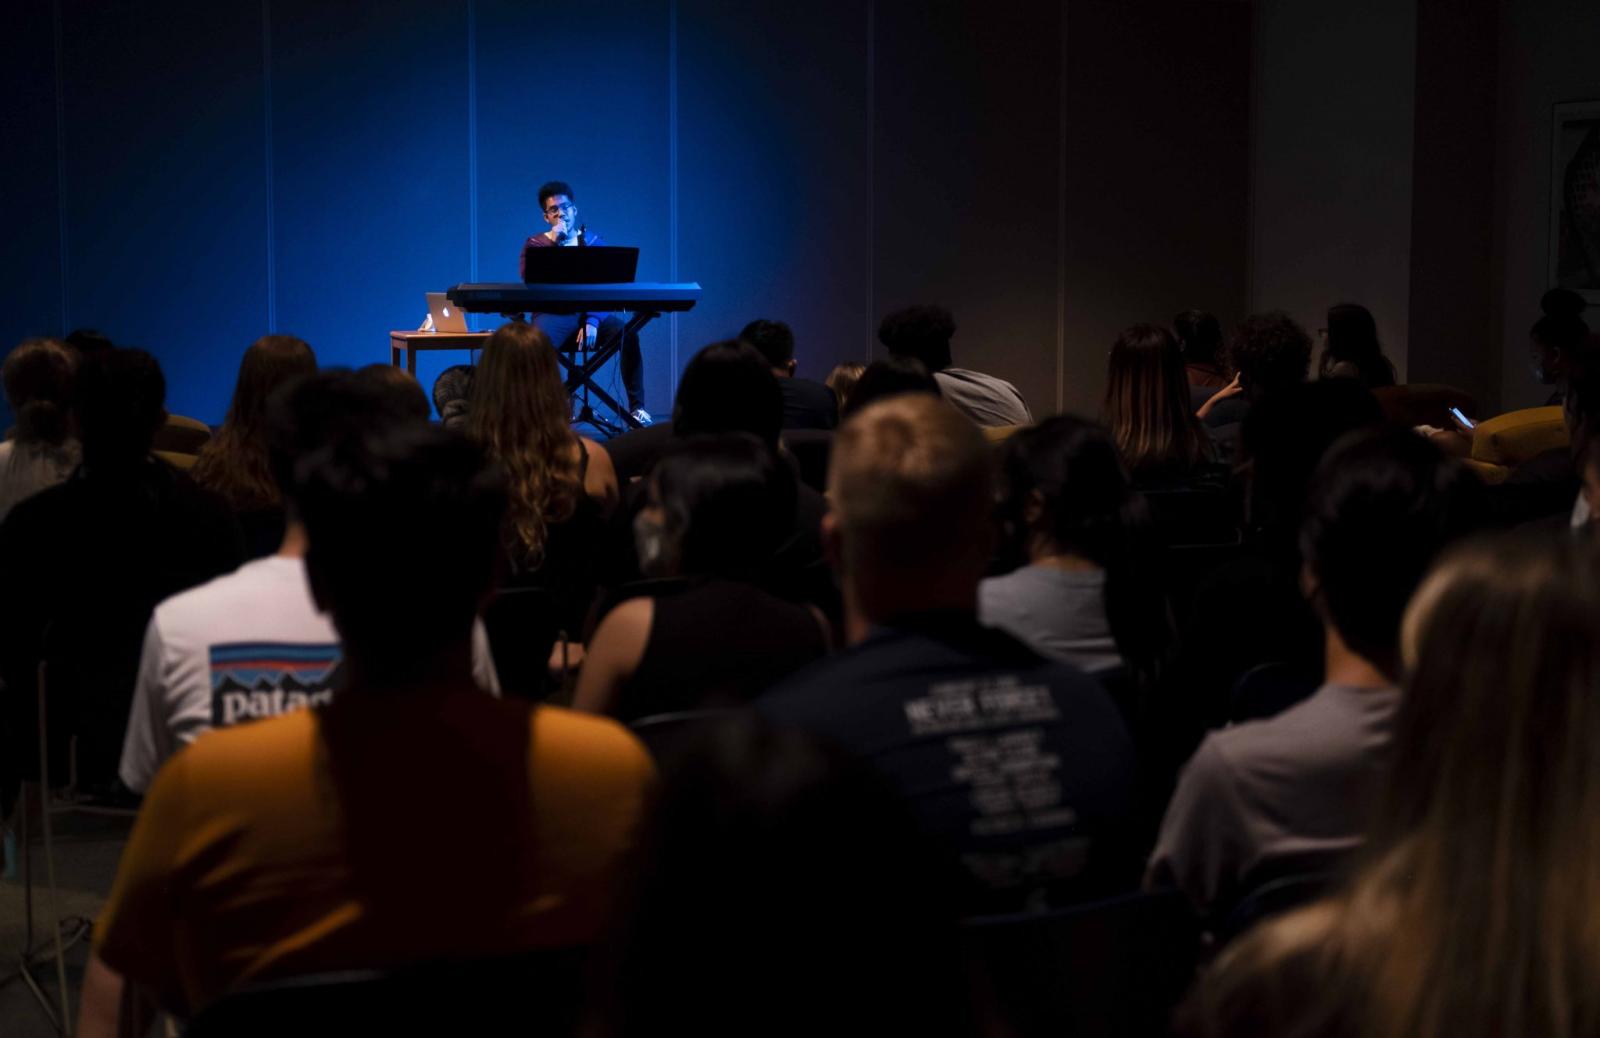 A student at an electronic keyboard under a blue spotlight sings on a makeshift stage while an audience watches.